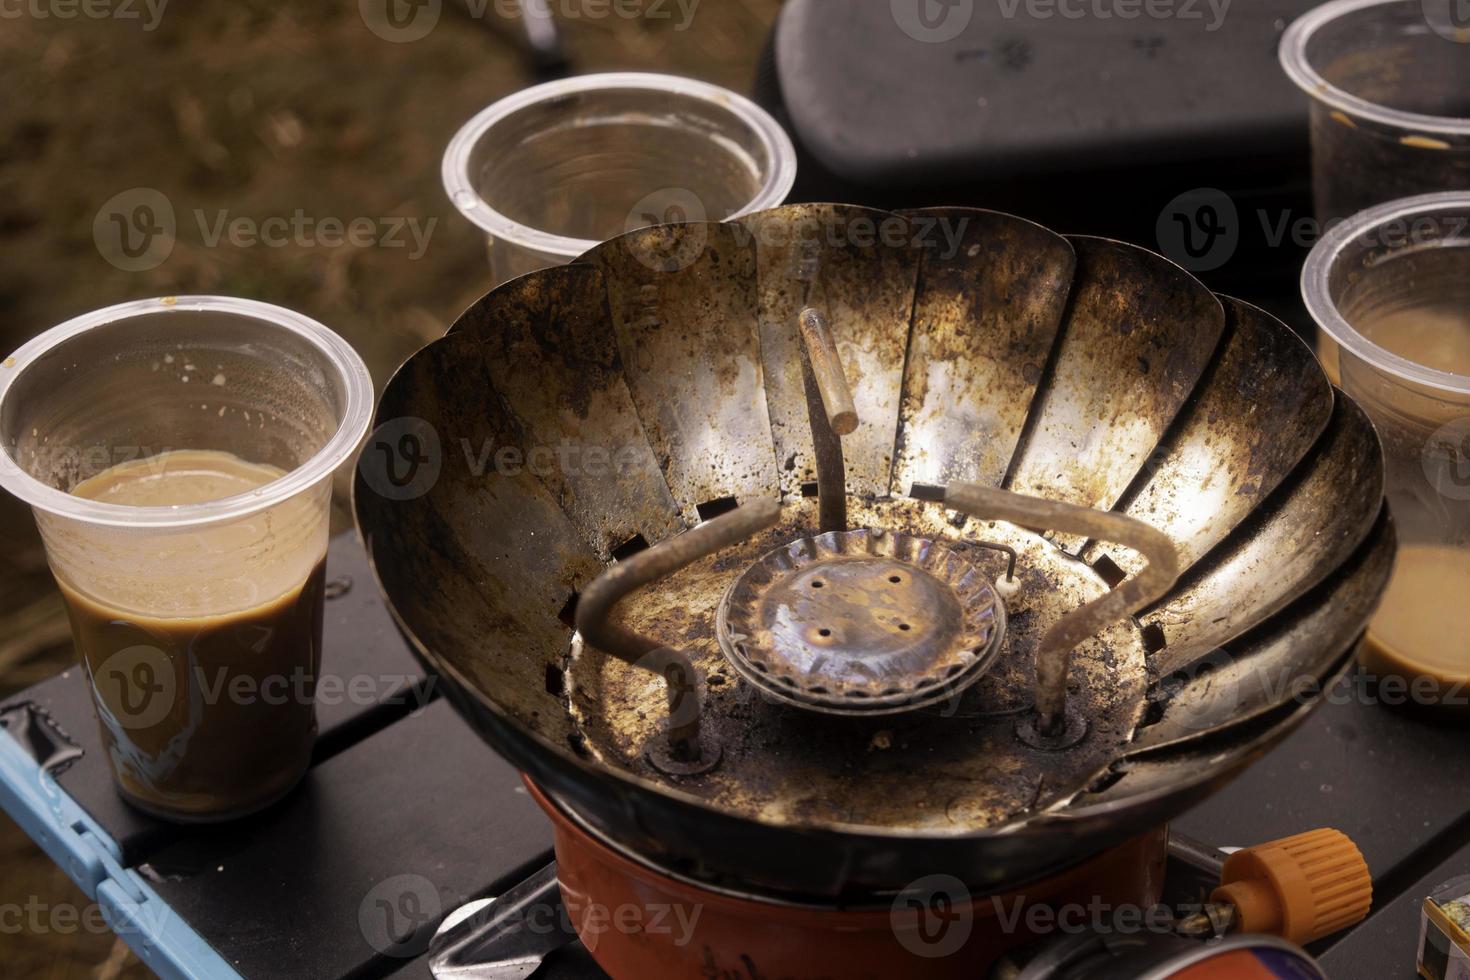 https://static.vecteezy.com/system/resources/previews/019/137/828/non_2x/coffee-and-rusty-camping-stove-photo.JPG